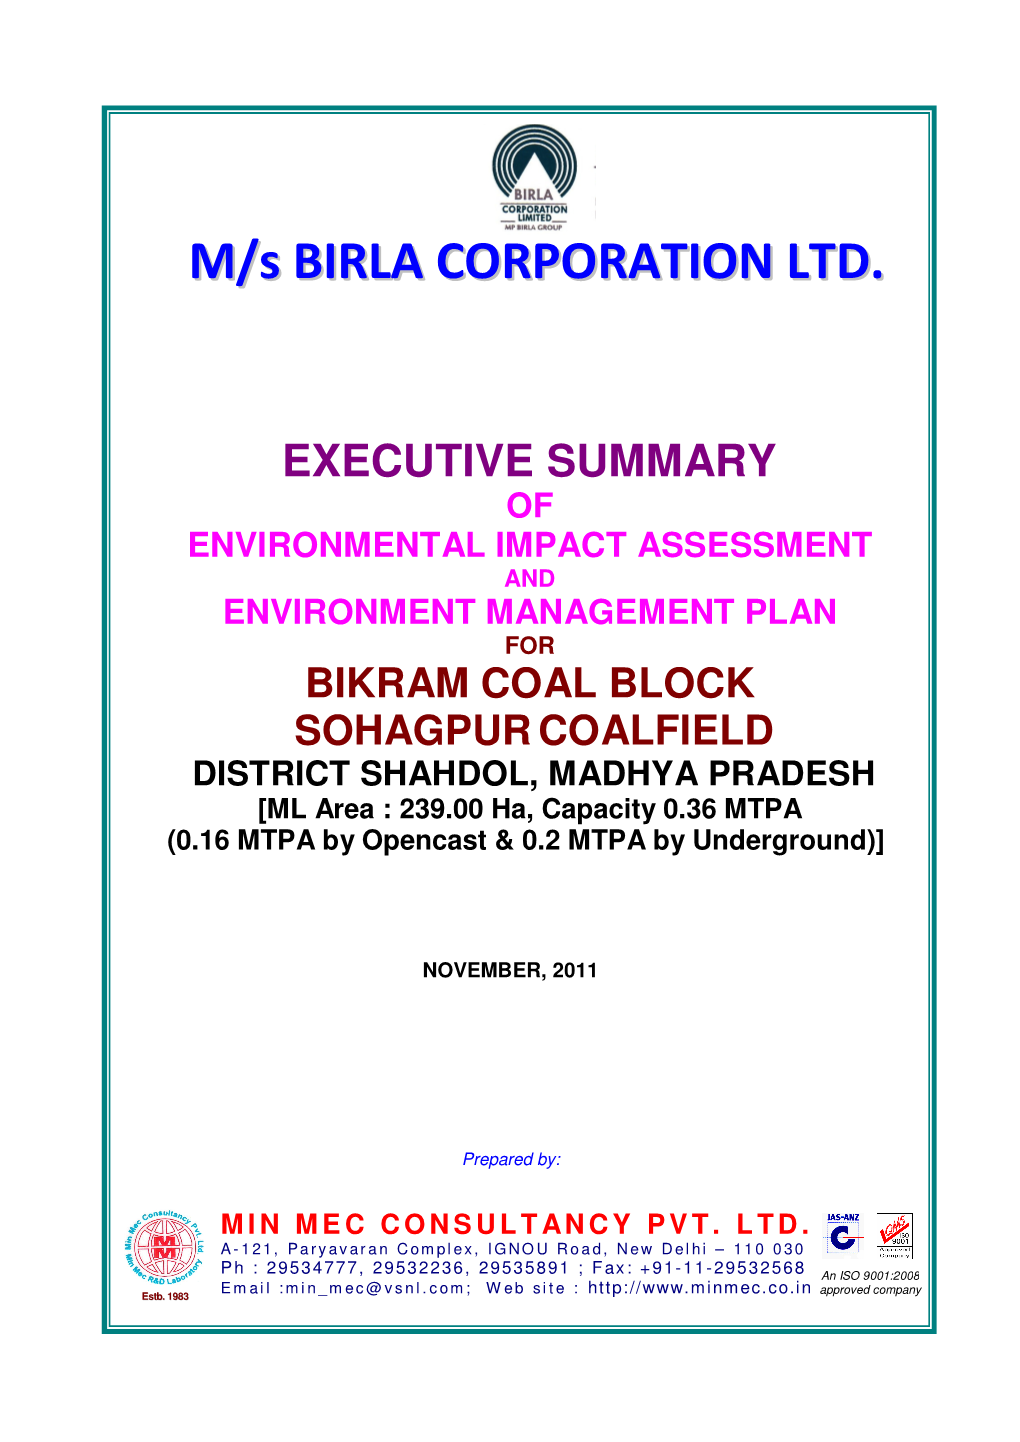 M/S Birla Corporation Ltd. Both Underground As Well As Opencast Method Has Been Proposed to Be Deployed